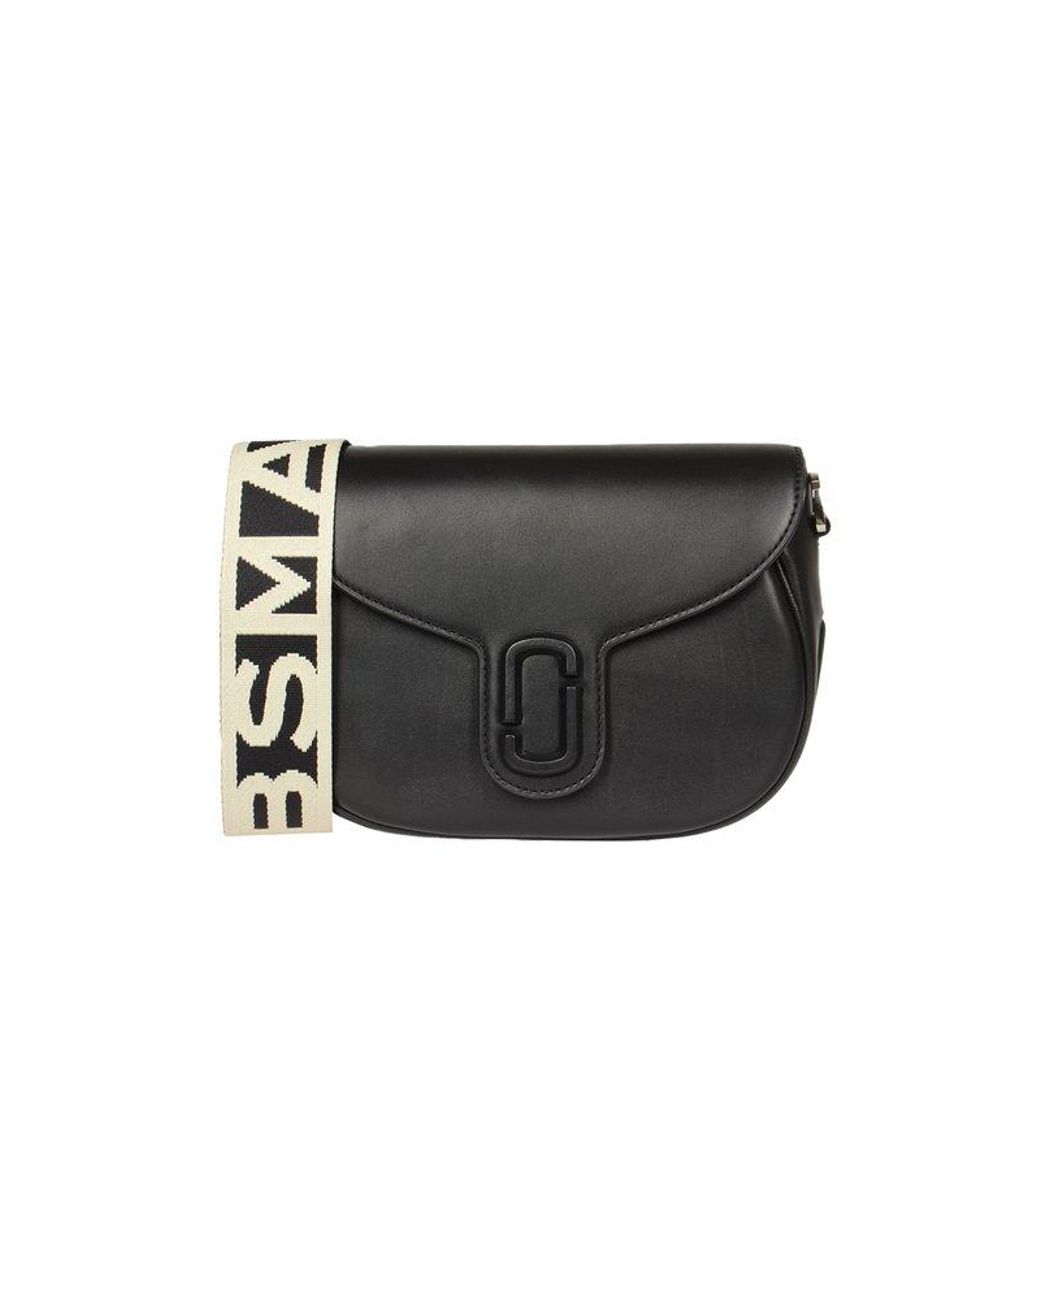 Marc Jacobs The Snapshot Foldover Top Crossbody Bag in Black | Lyst Canada